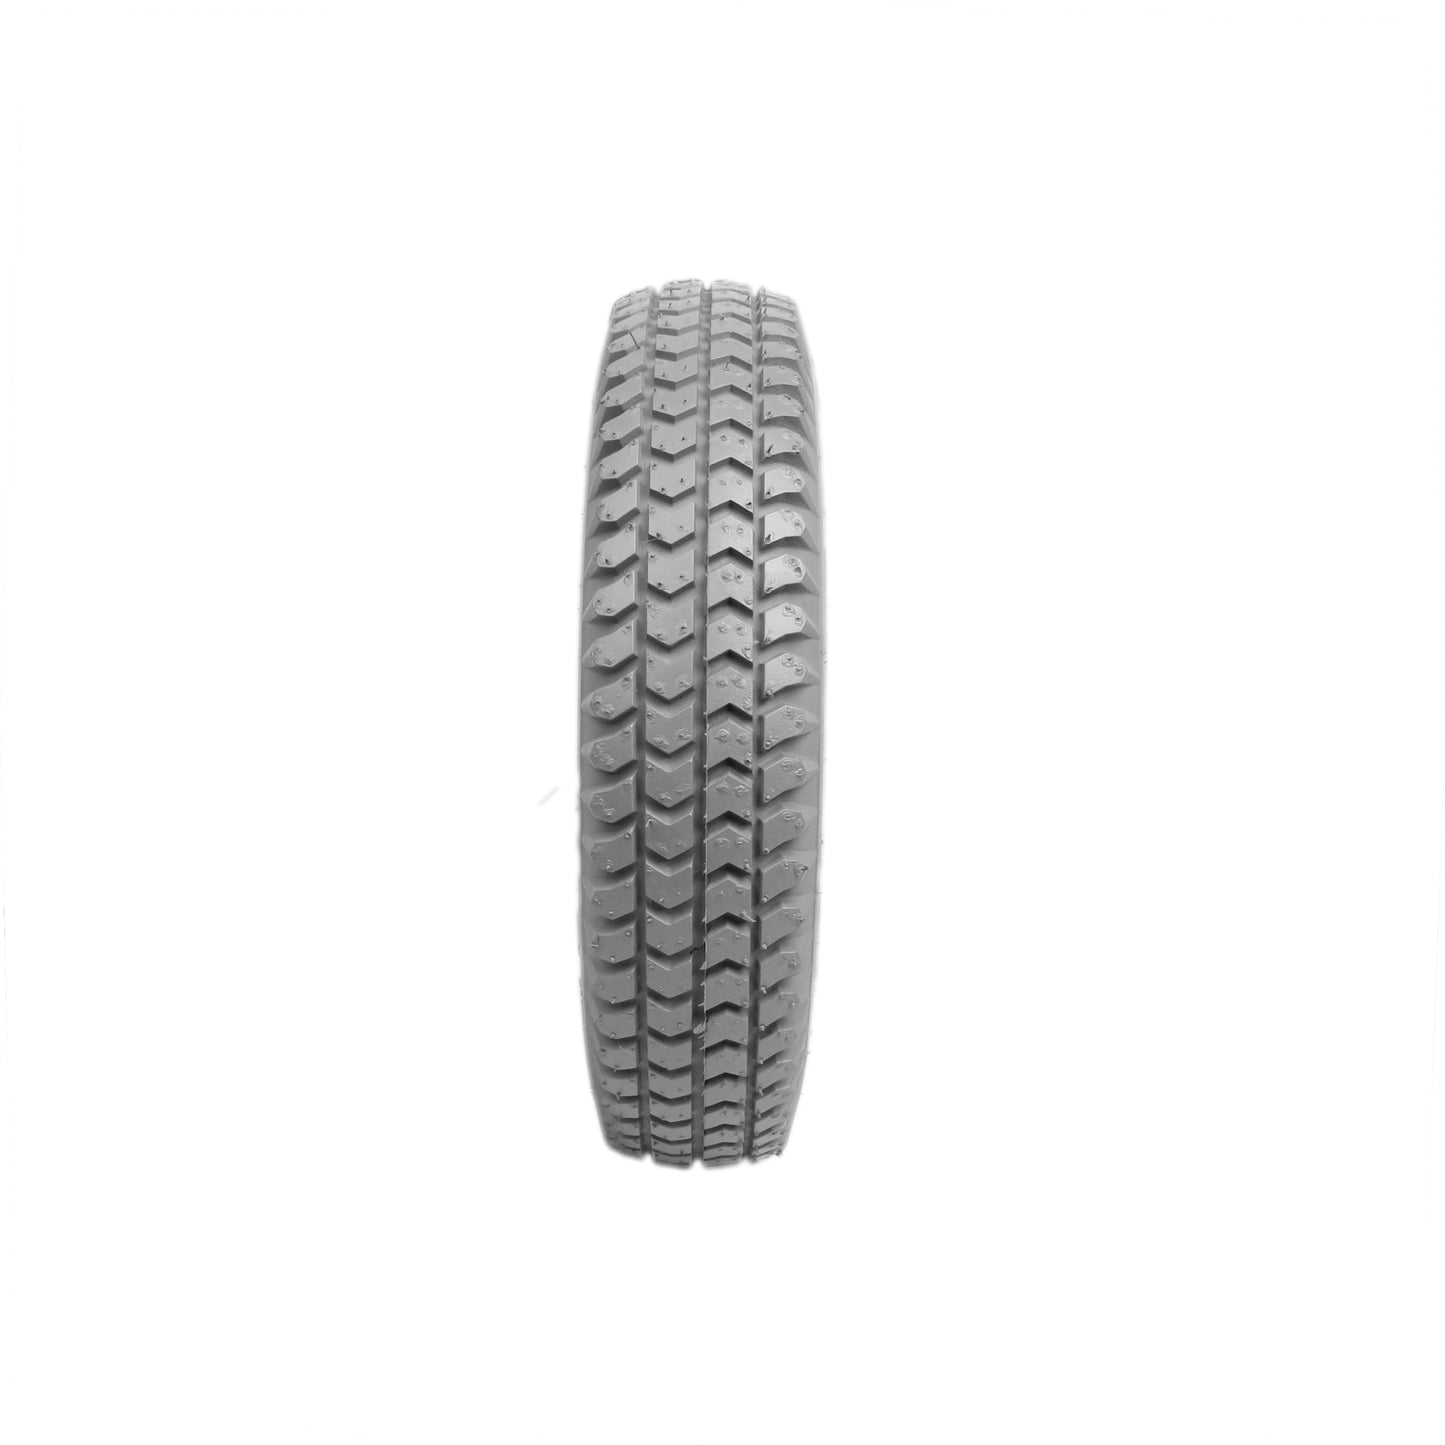 3.00-8" (14x3") All Weather Pneumatic Tire